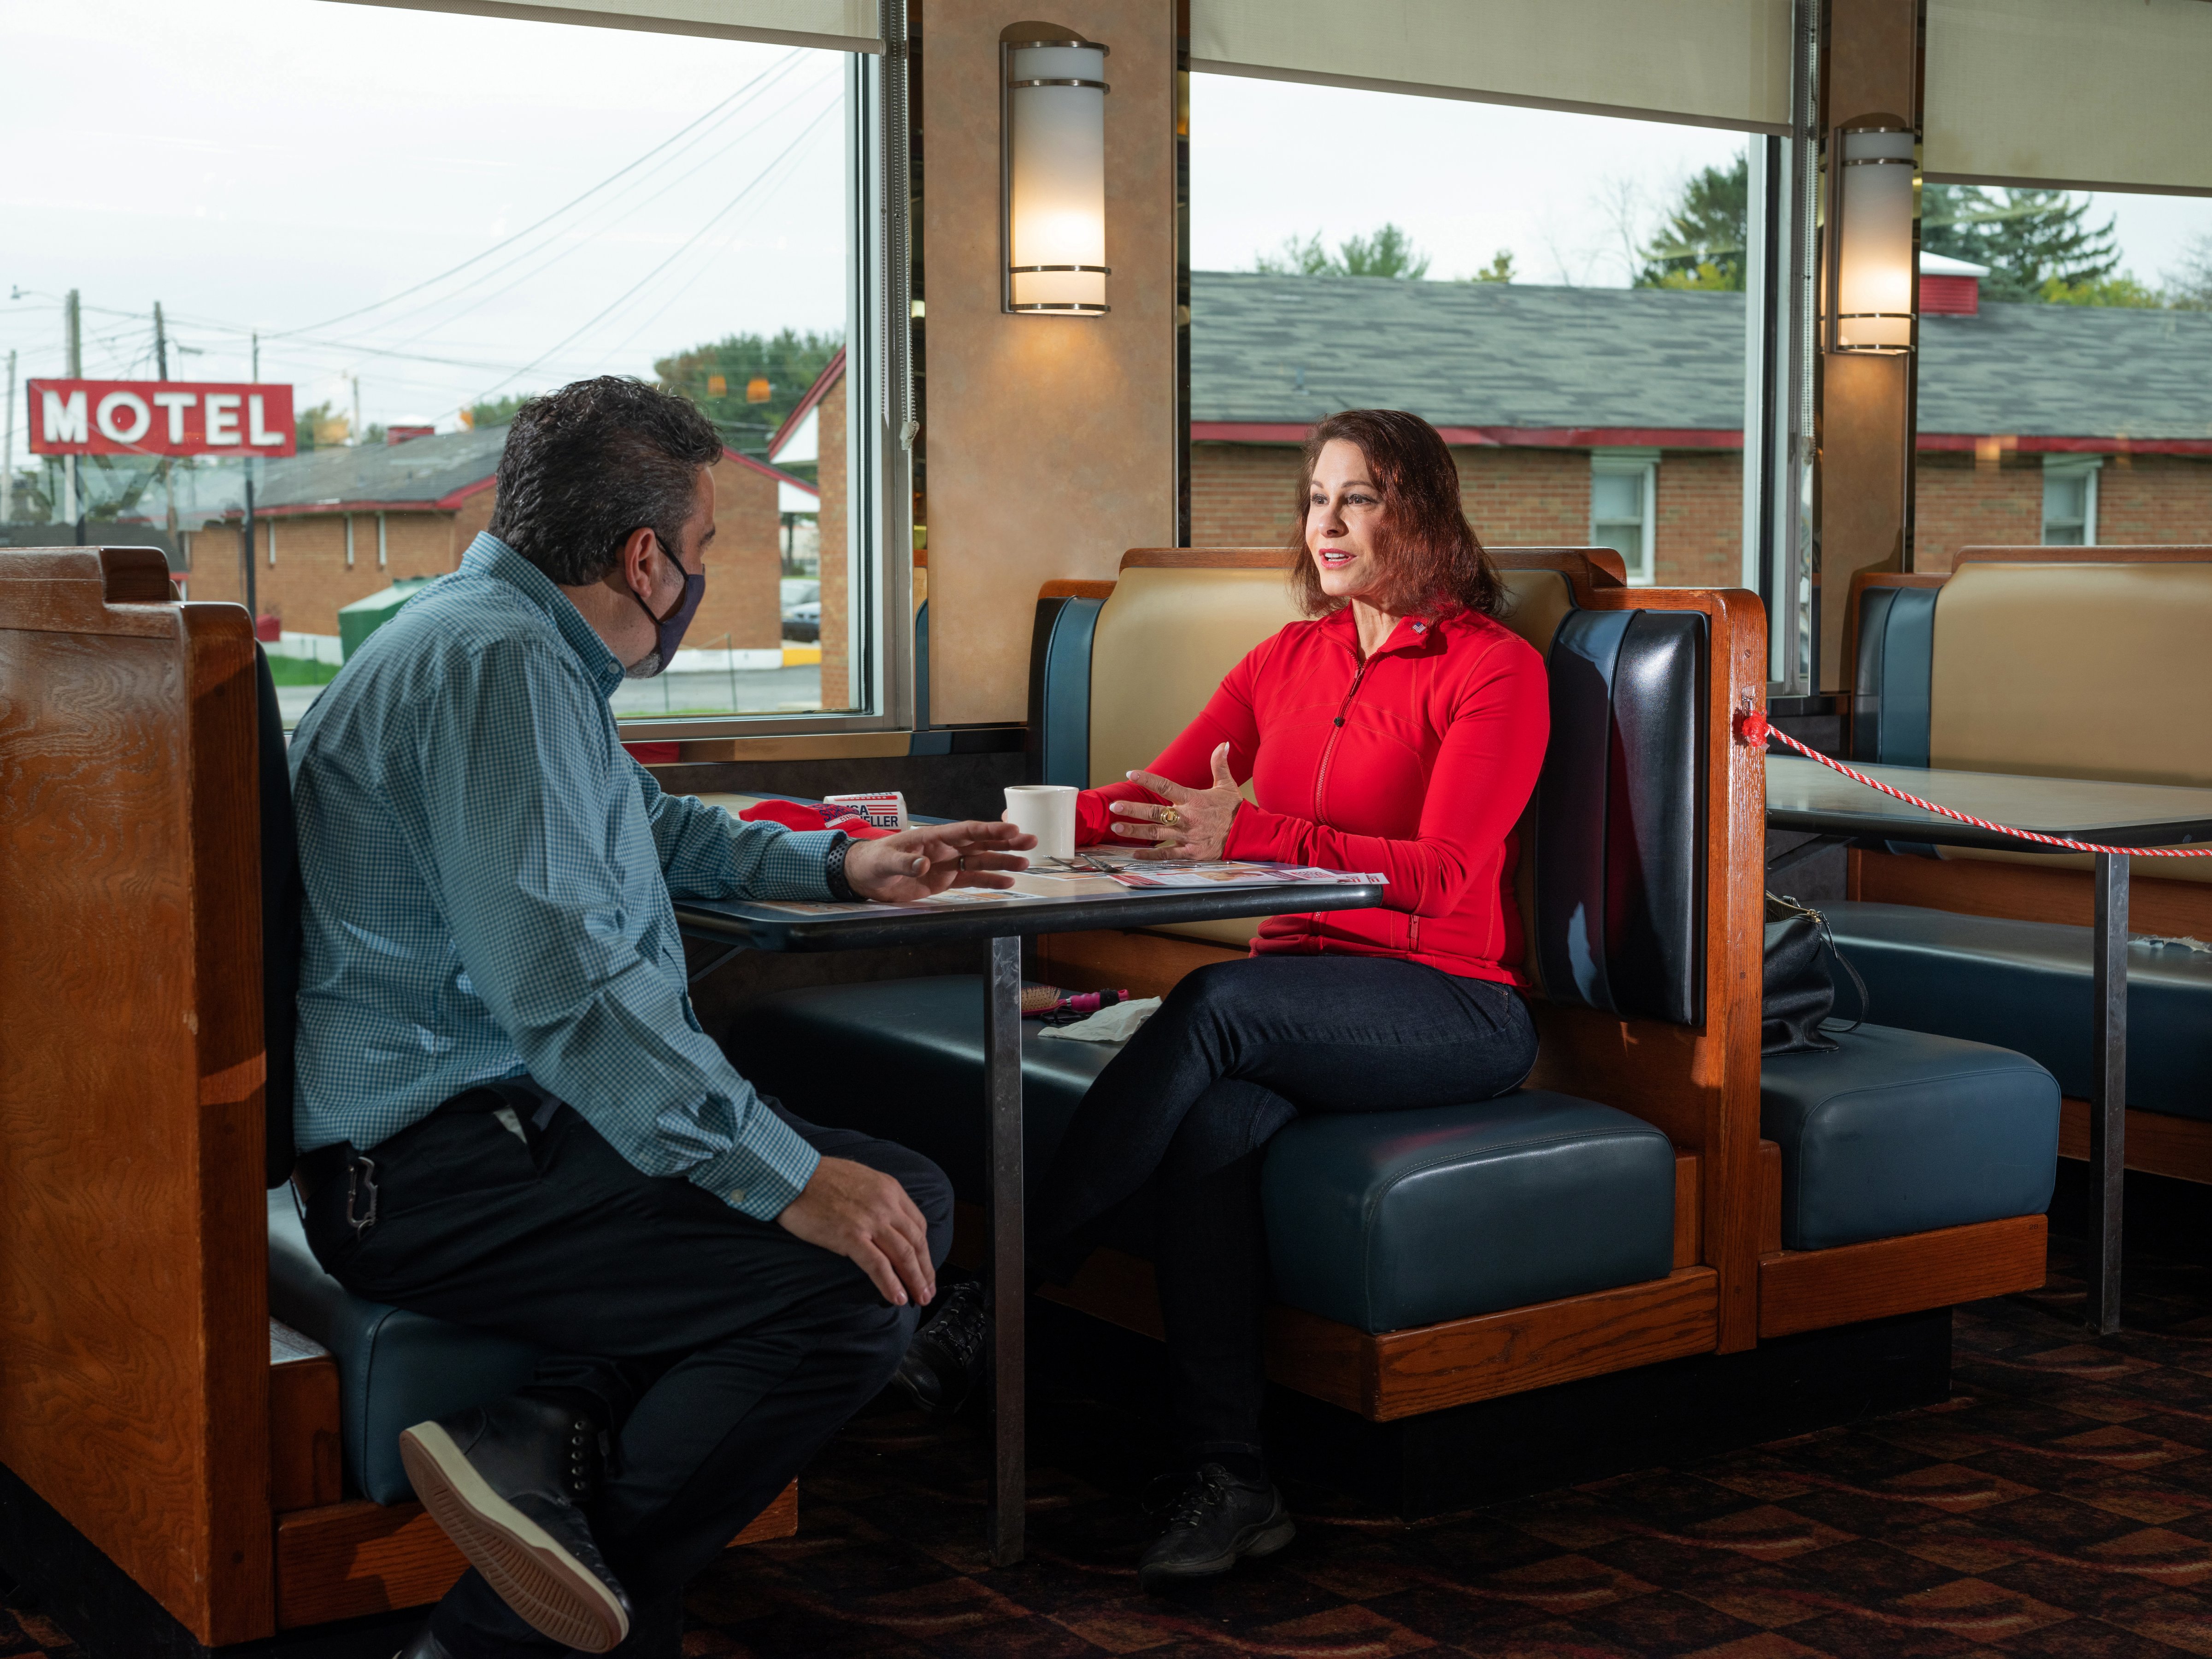 2020 Republican candidate for Pennsylvania's 7th District House race, Lisa Scheller, starts a long day of campaigning at a diner in Allentown, Pa., on Oct. 24, 2020. (Elizabeth Bick for TIME)